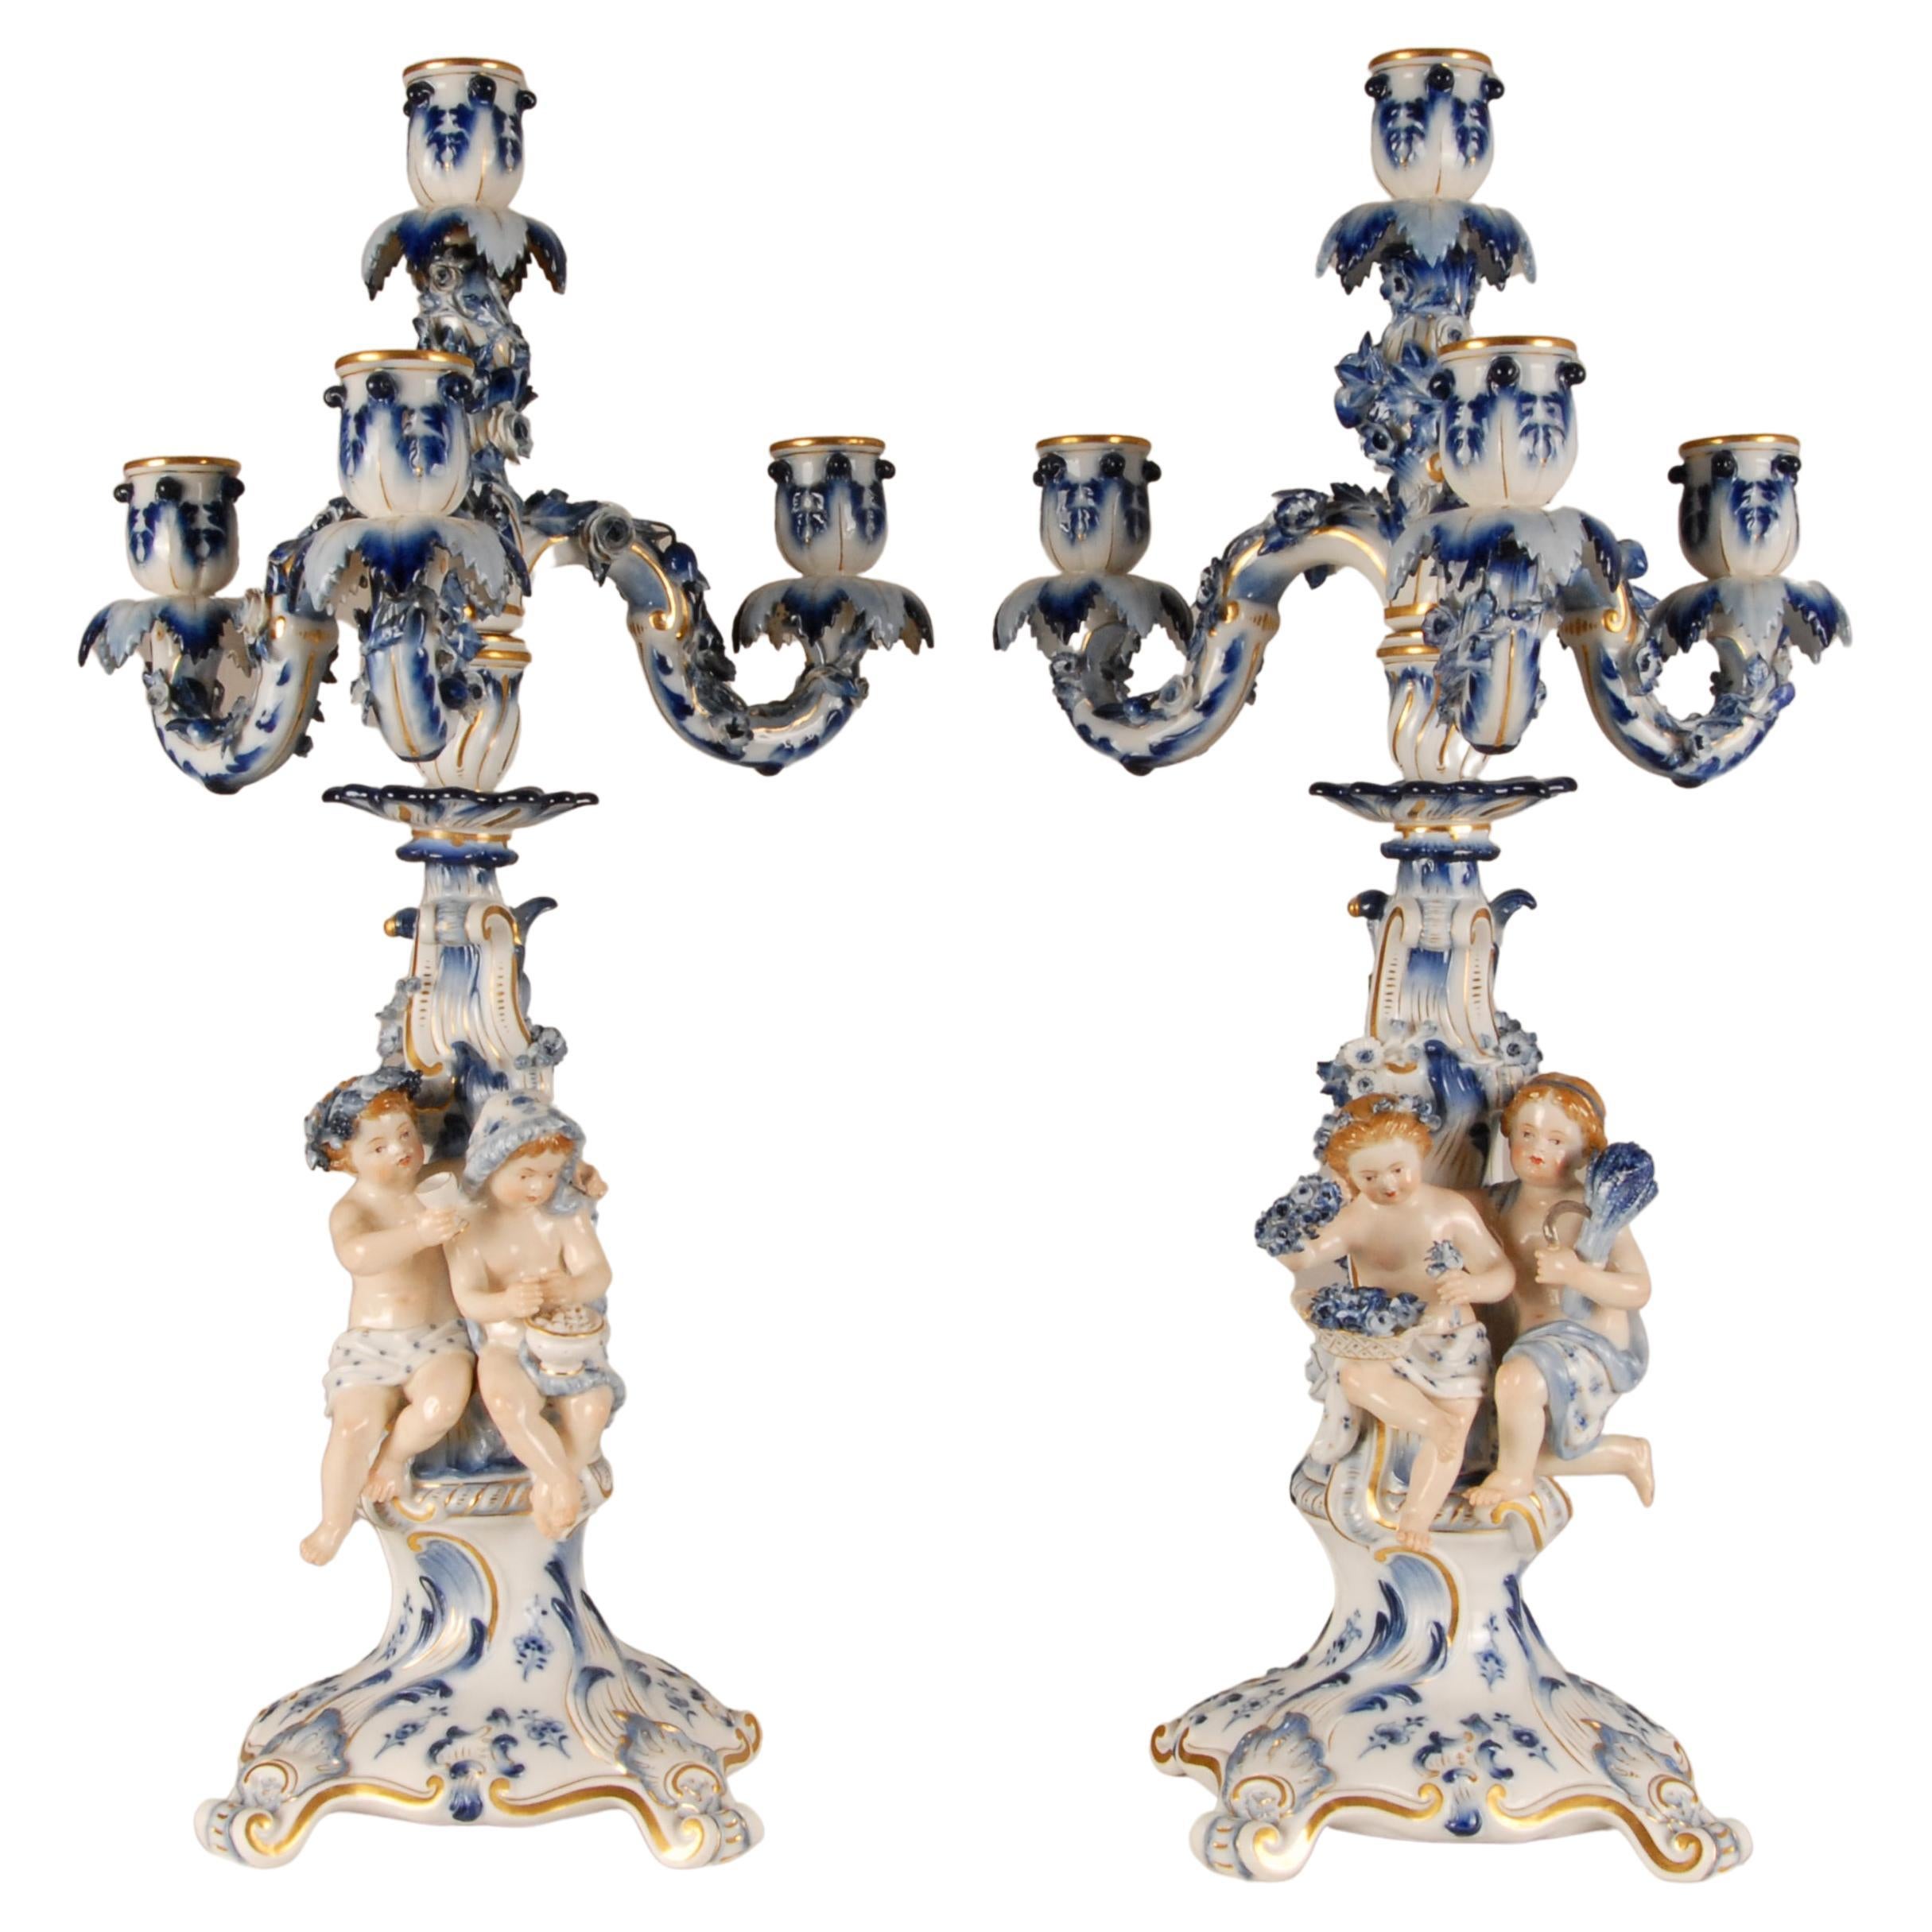 19th century Meissen Porcelain Candelabras figurine white and Blue Union, a Pair For Sale